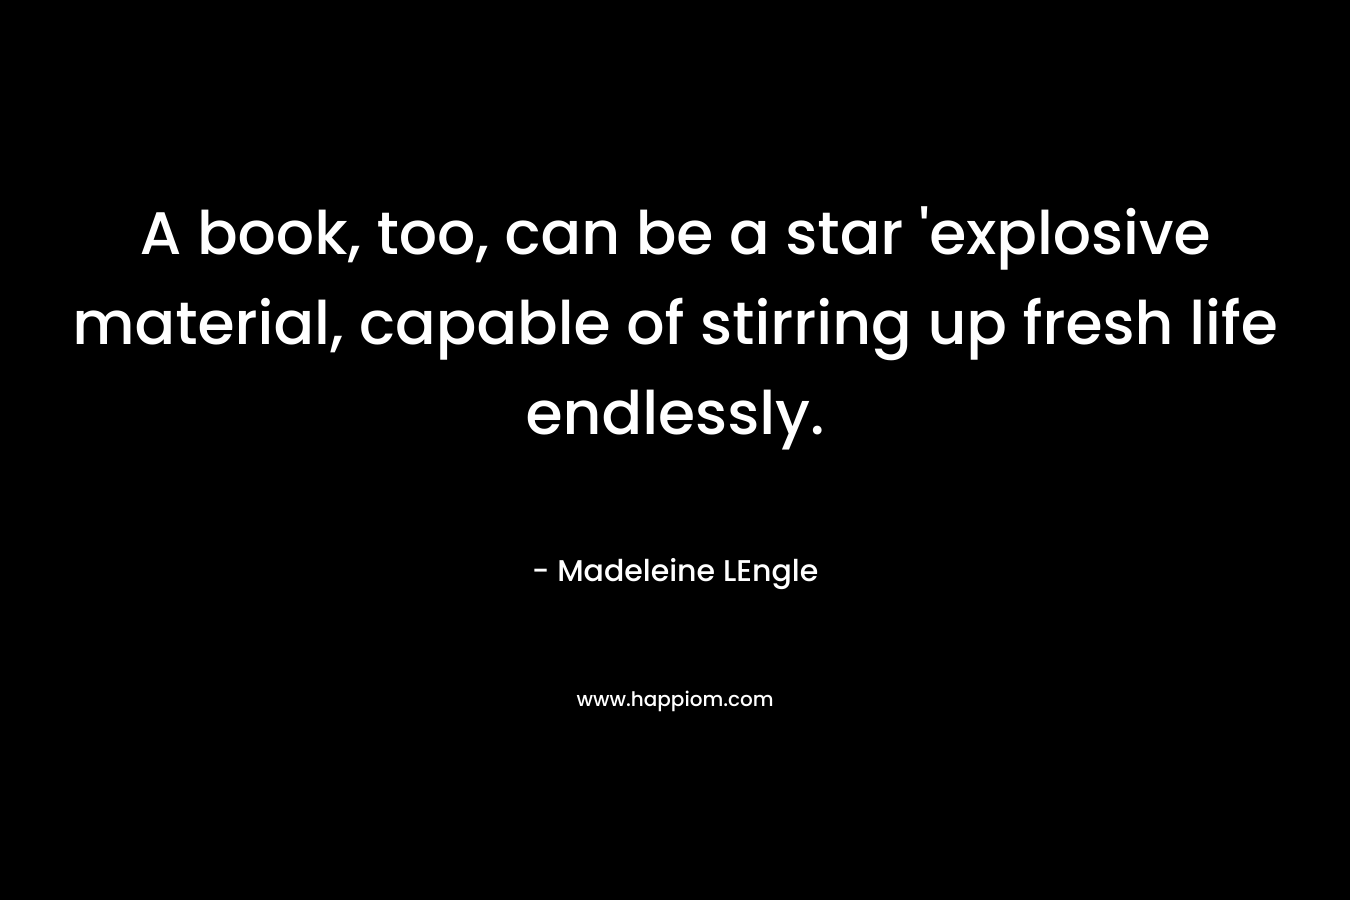 A book, too, can be a star ‘explosive material, capable of stirring up fresh life endlessly. – Madeleine LEngle